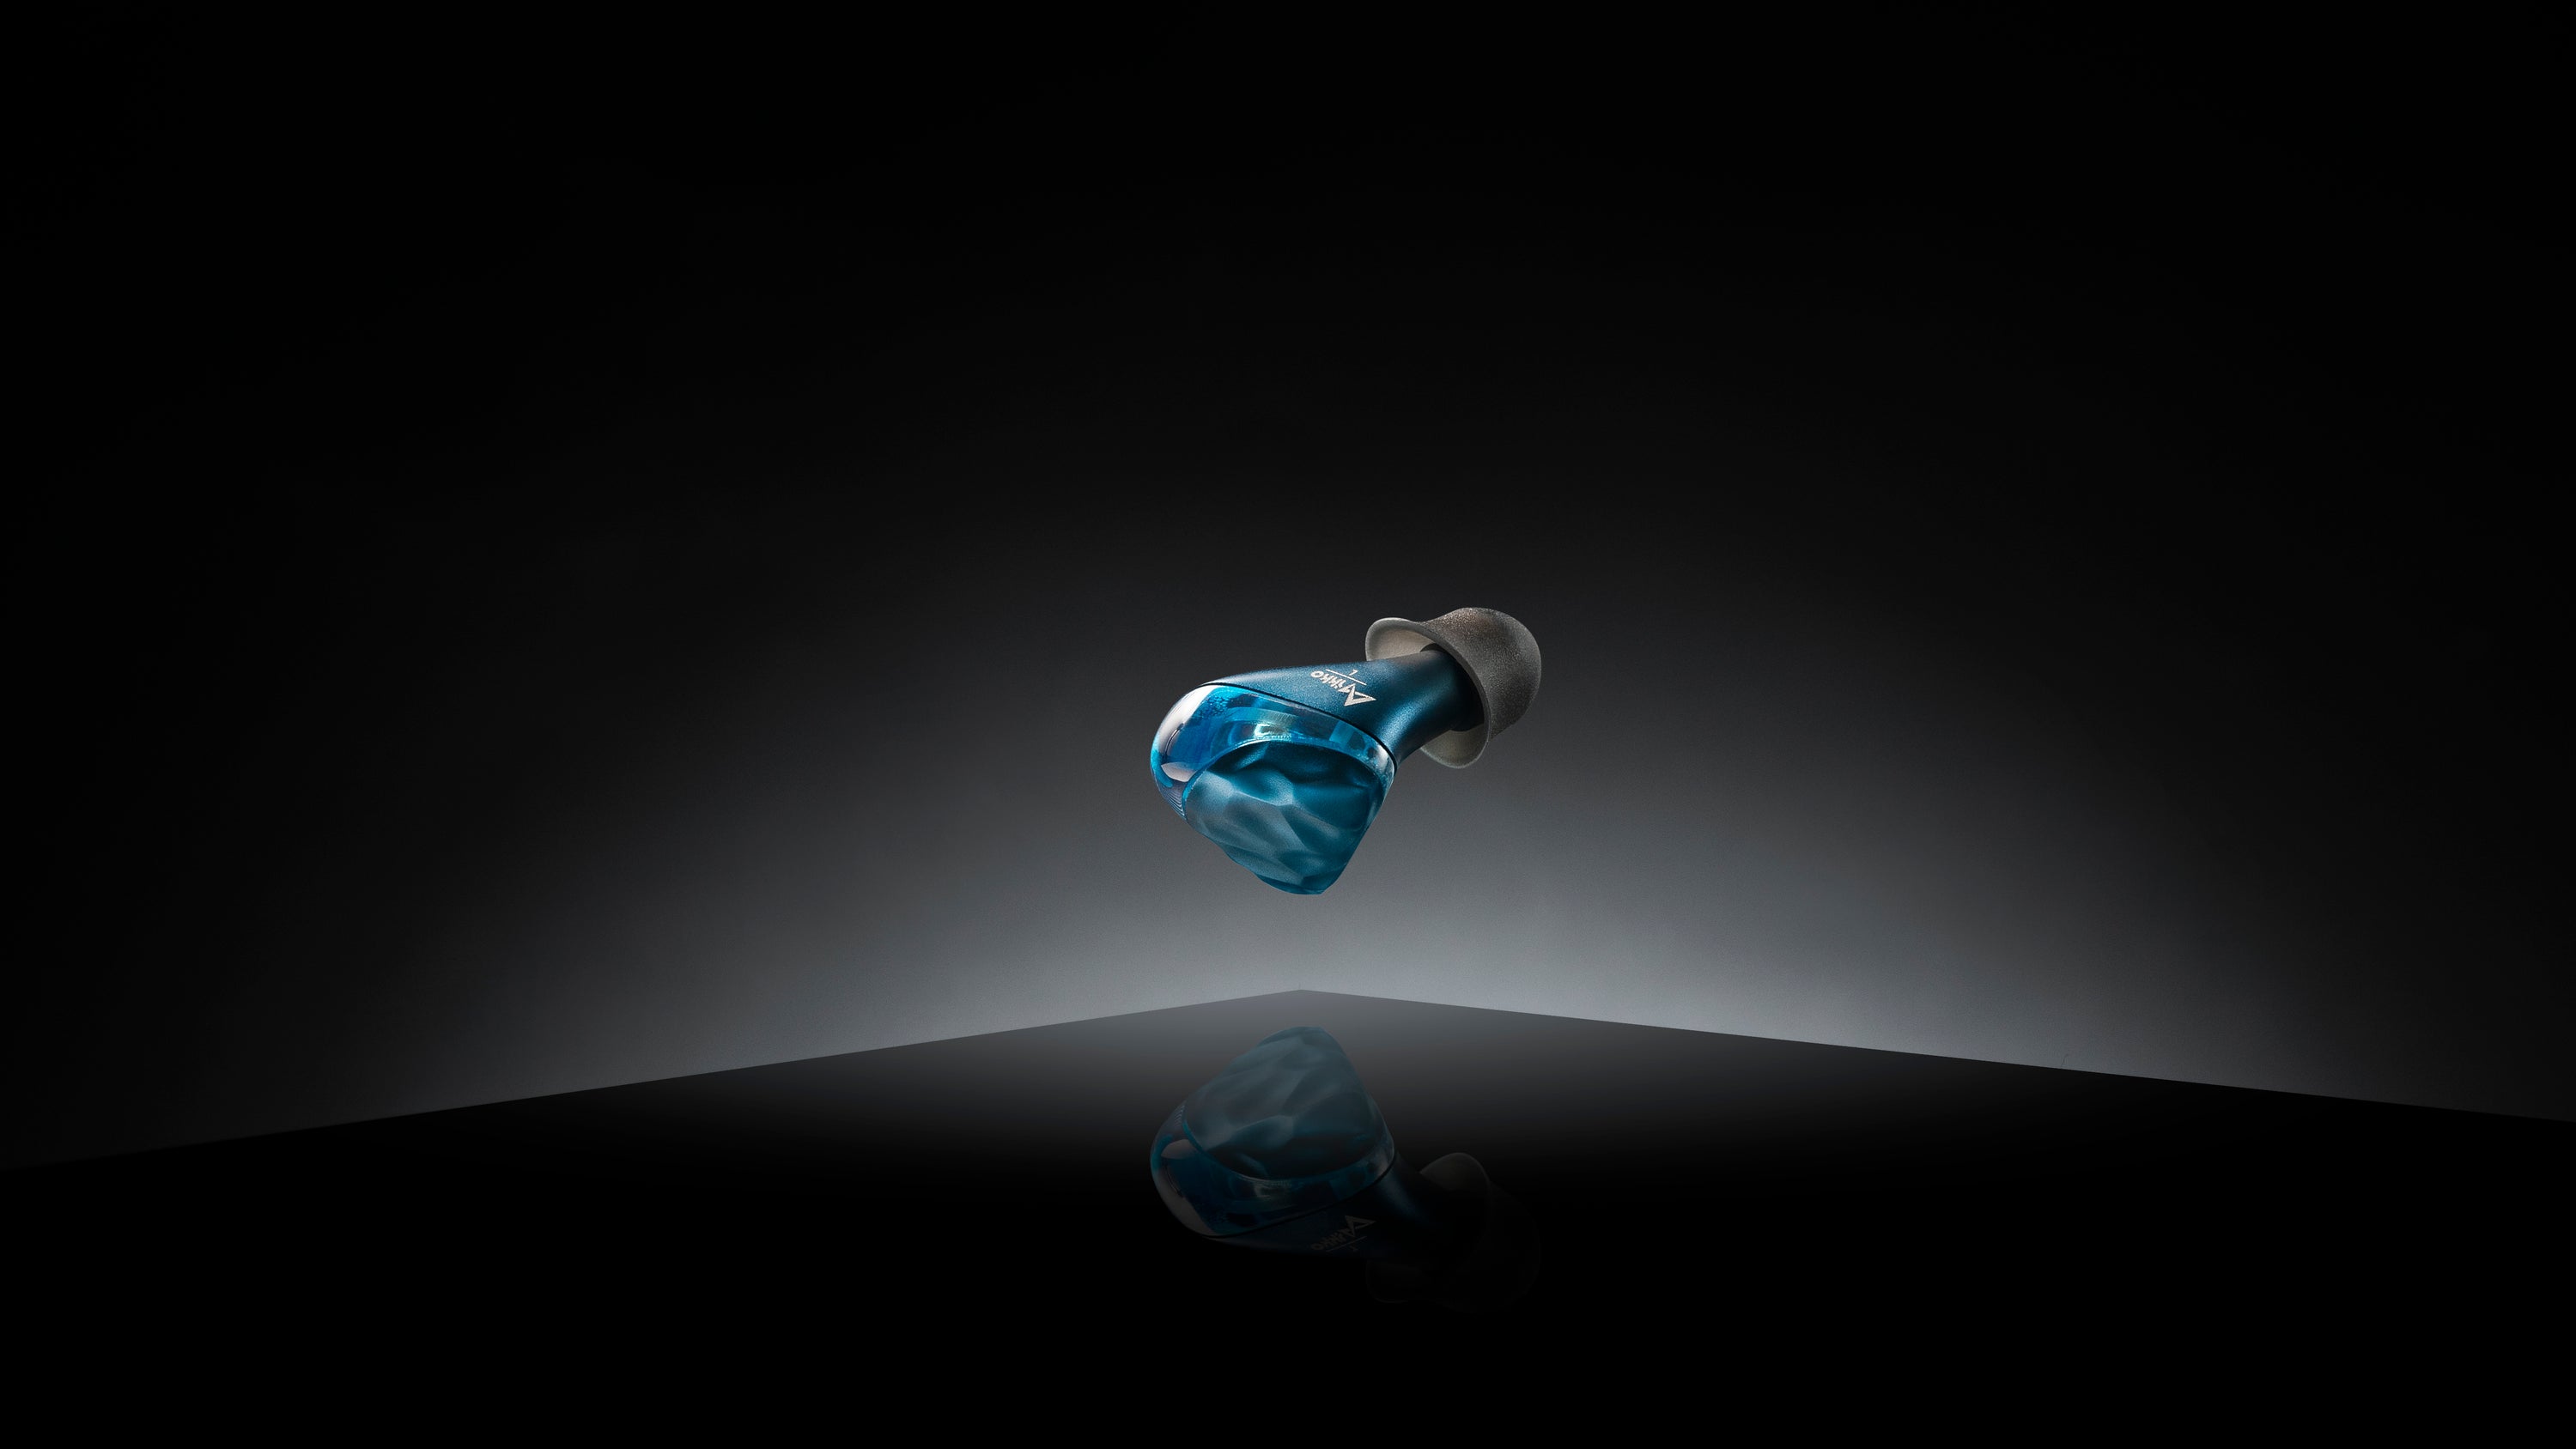 In-Ear Monitors Or Ear Buds? - Make Your Choice